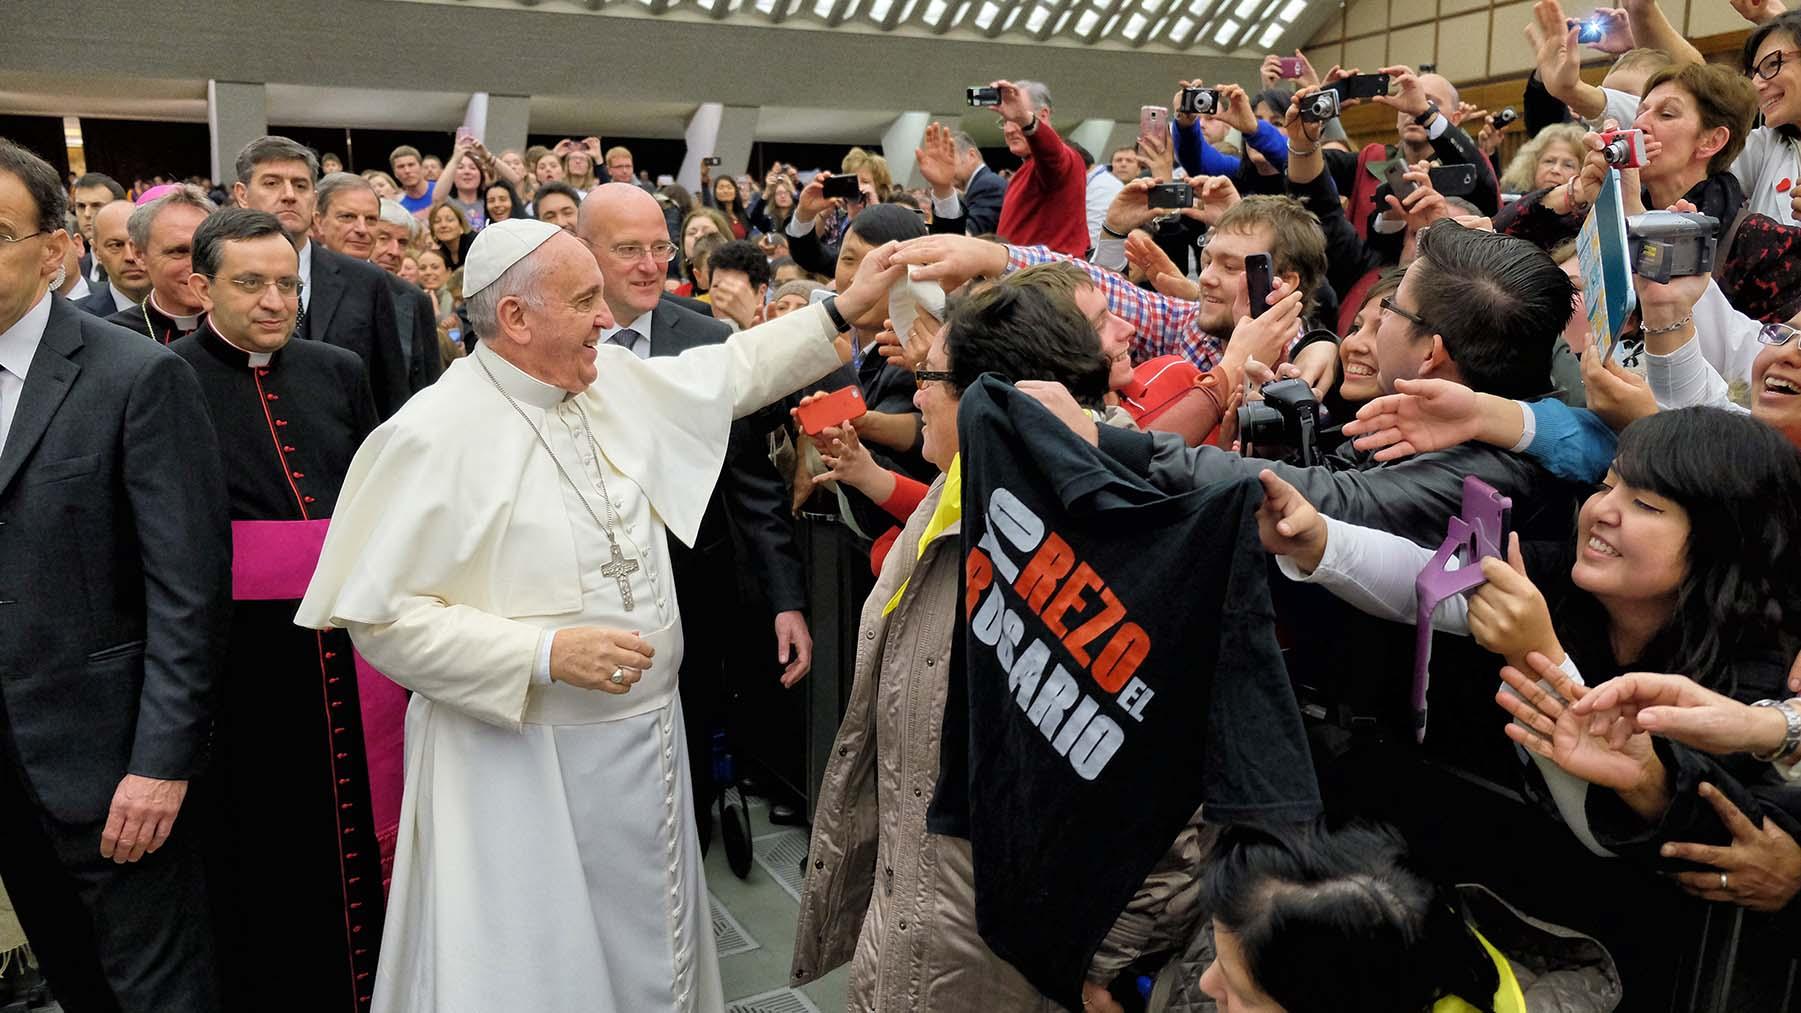 Pope Francis and University of Mary Student Exchange Zucchettos